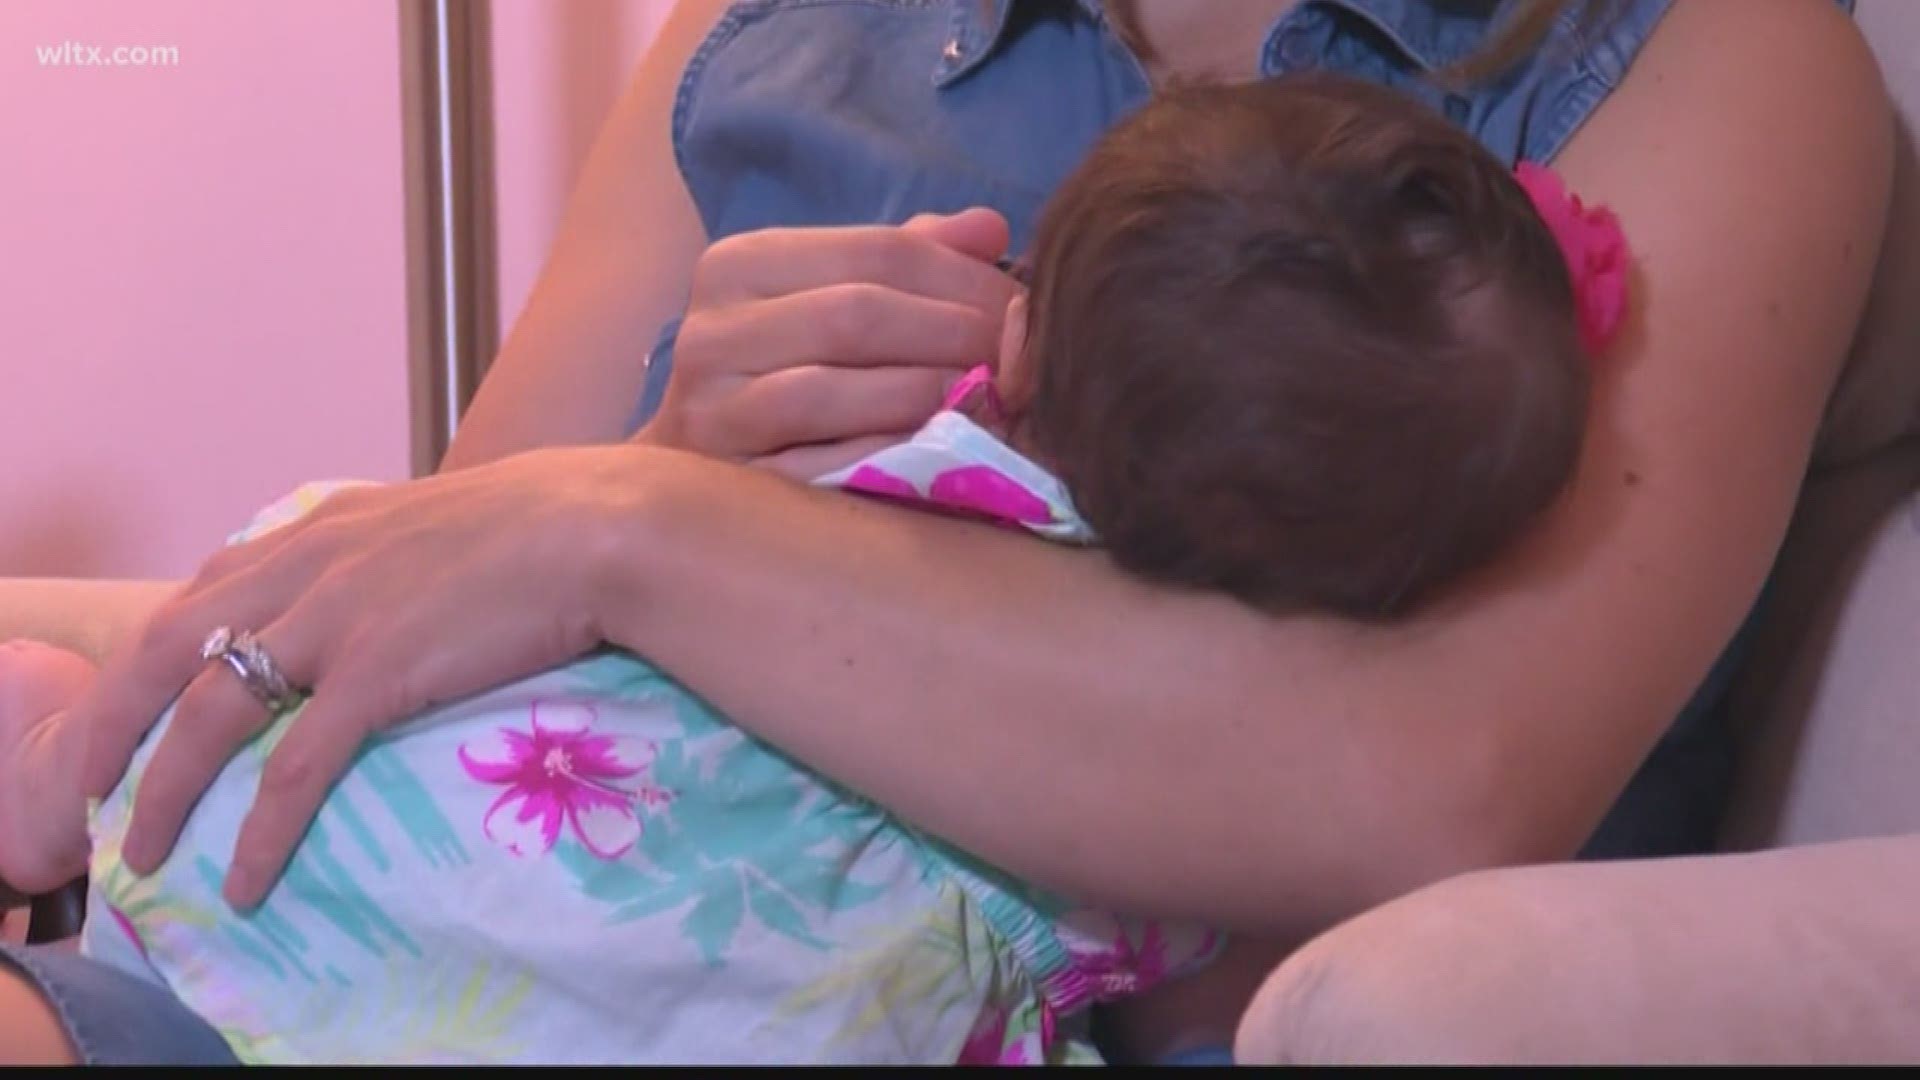 Most moms know the benefits of breastfeeding their child, but now researchers at the University of South Carolina believe moms can also benefit.